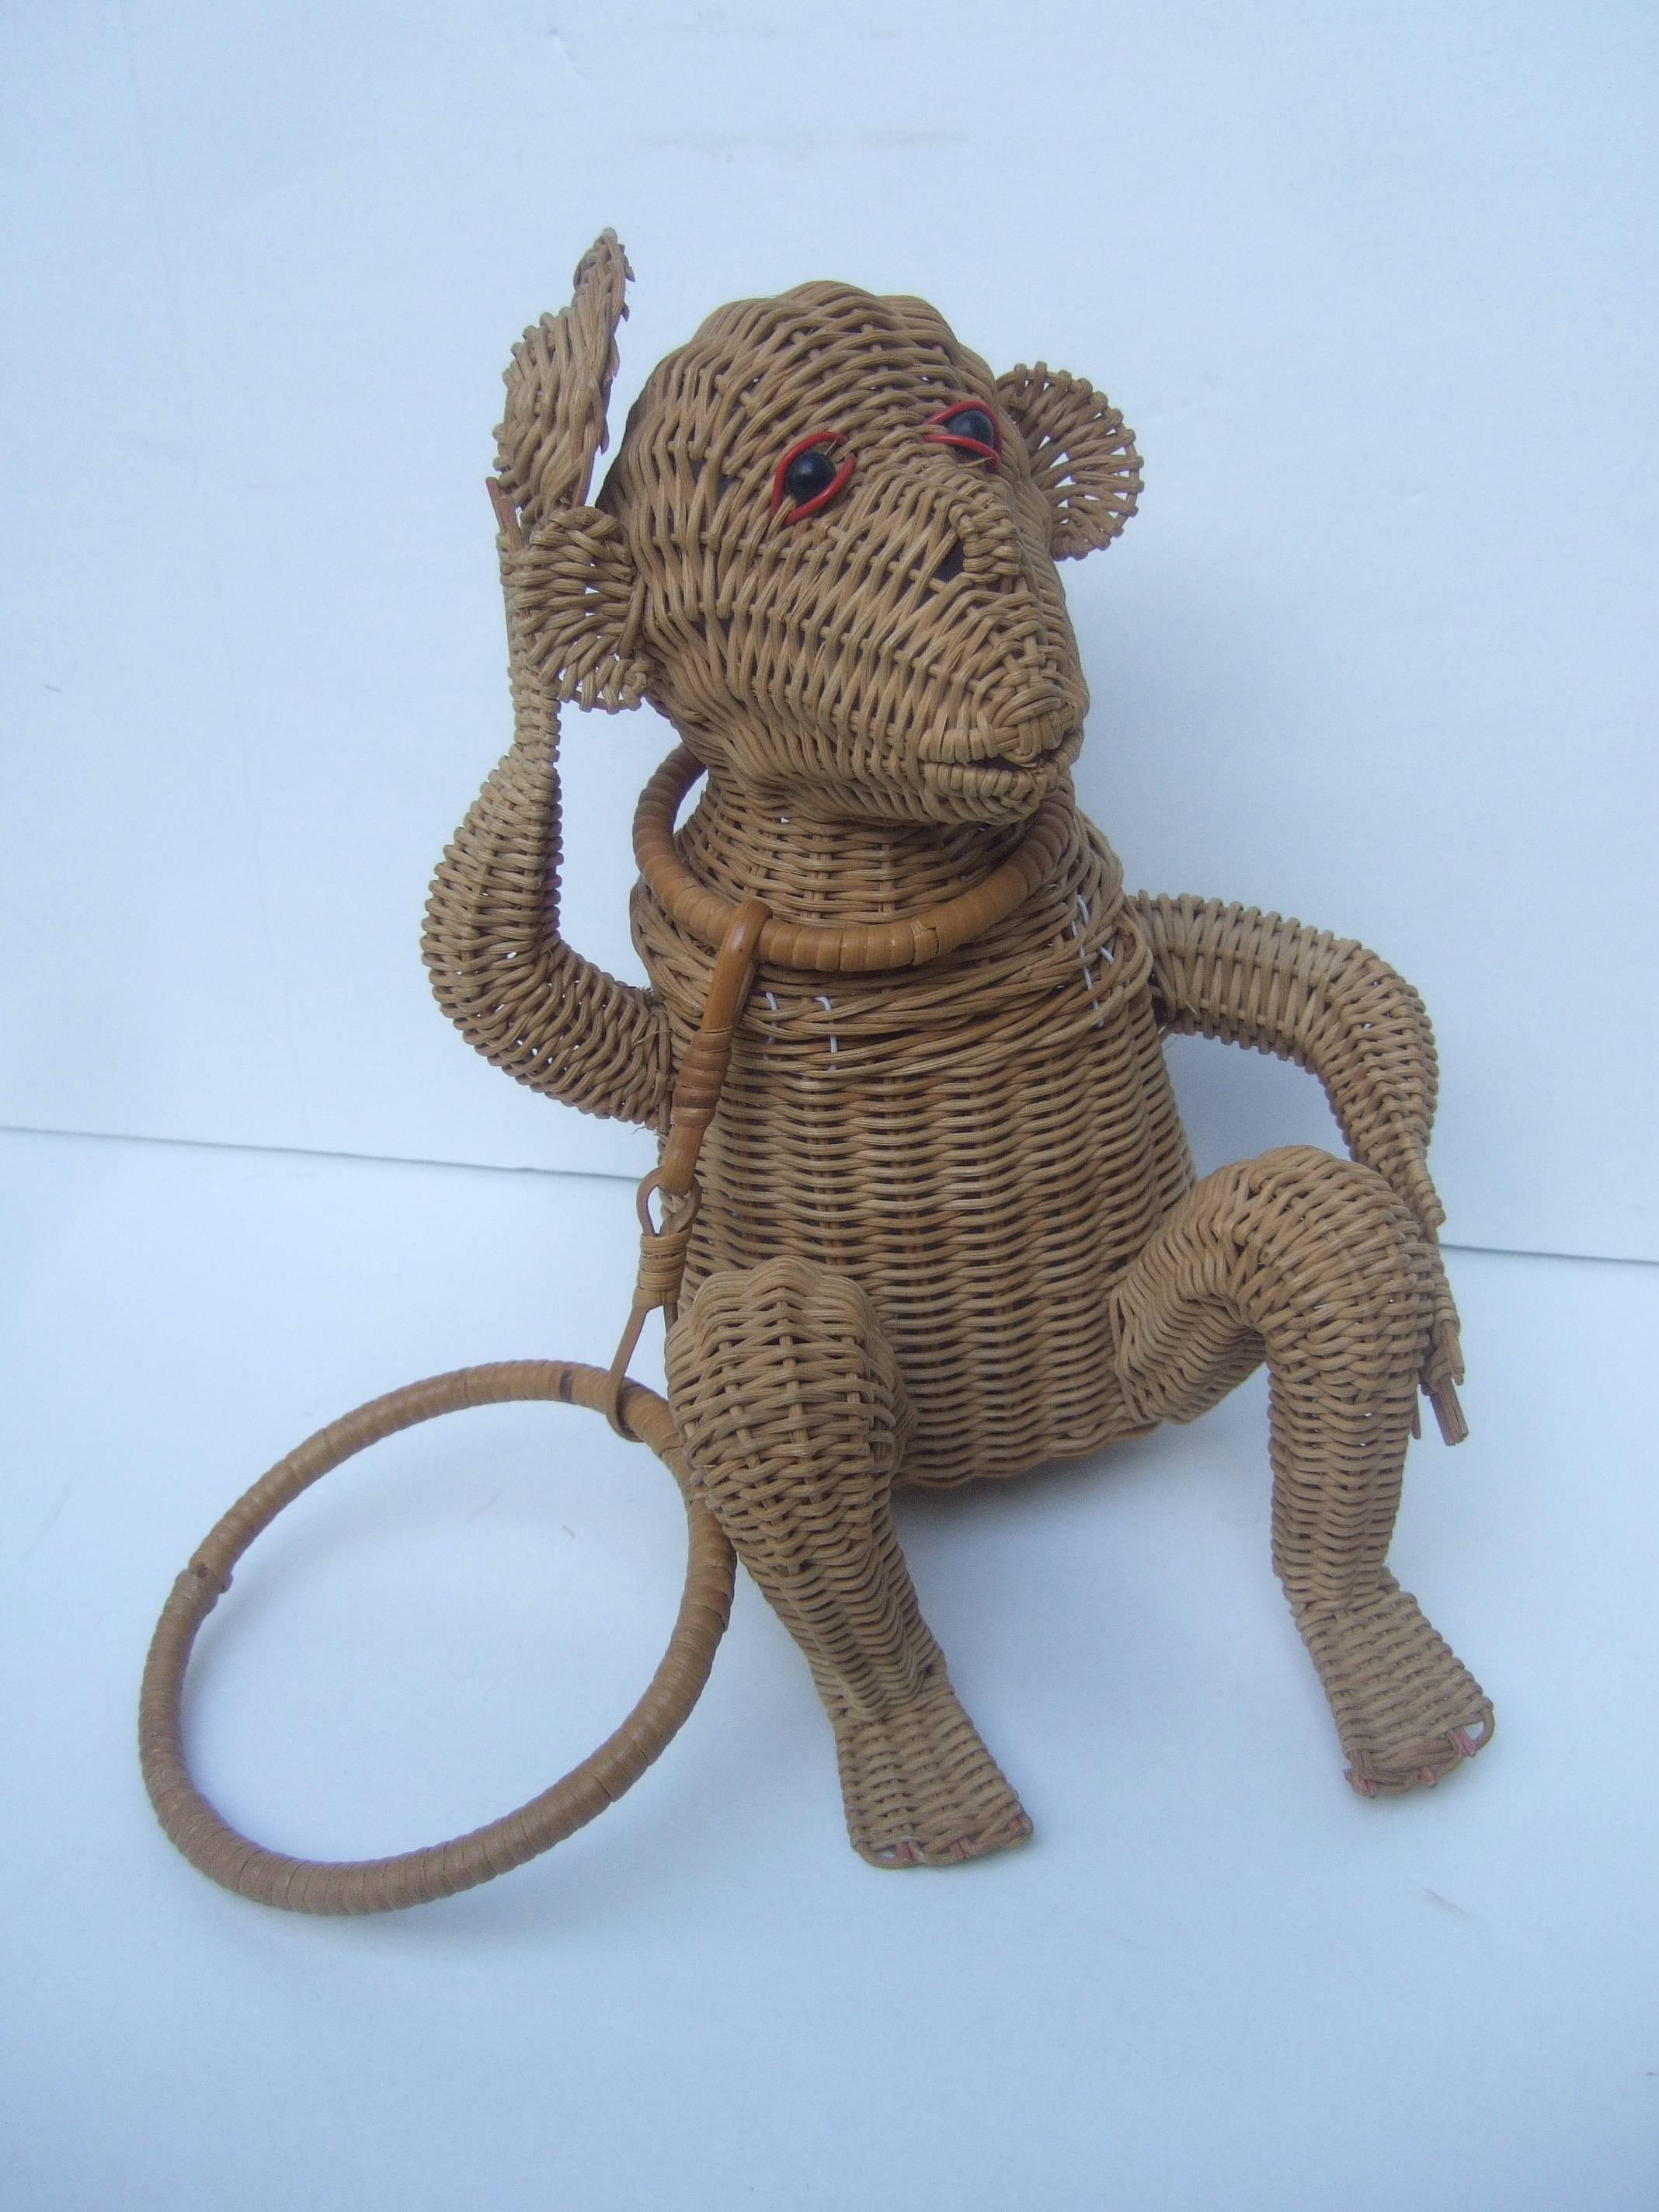 Whimsical wicker monkey novelty handbag ca. 1960
The unique artisan handbag captures a charming
monkey with black beaded eyes tipping his hat

The charming wicker monkey handbag is carried
with a circular wicker handle. The back side of
the